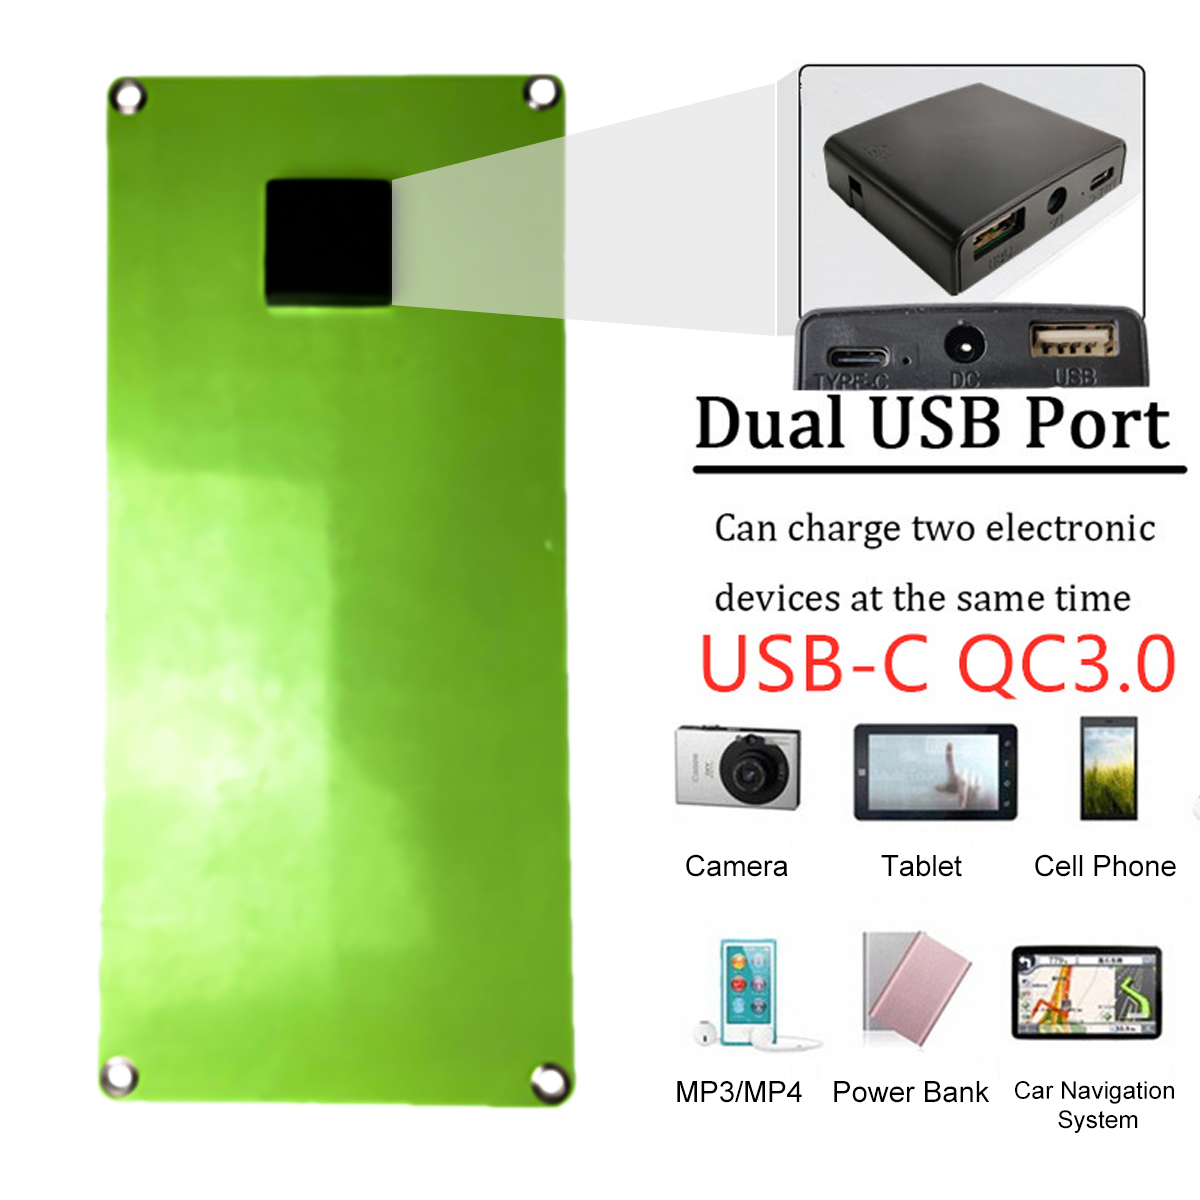 DC-200W-18V-Solar-Panel-Kit-Double-USB-Port-Controller-Power-Bank-Portable-Battery-Charger-for-Outdo-1812074-4